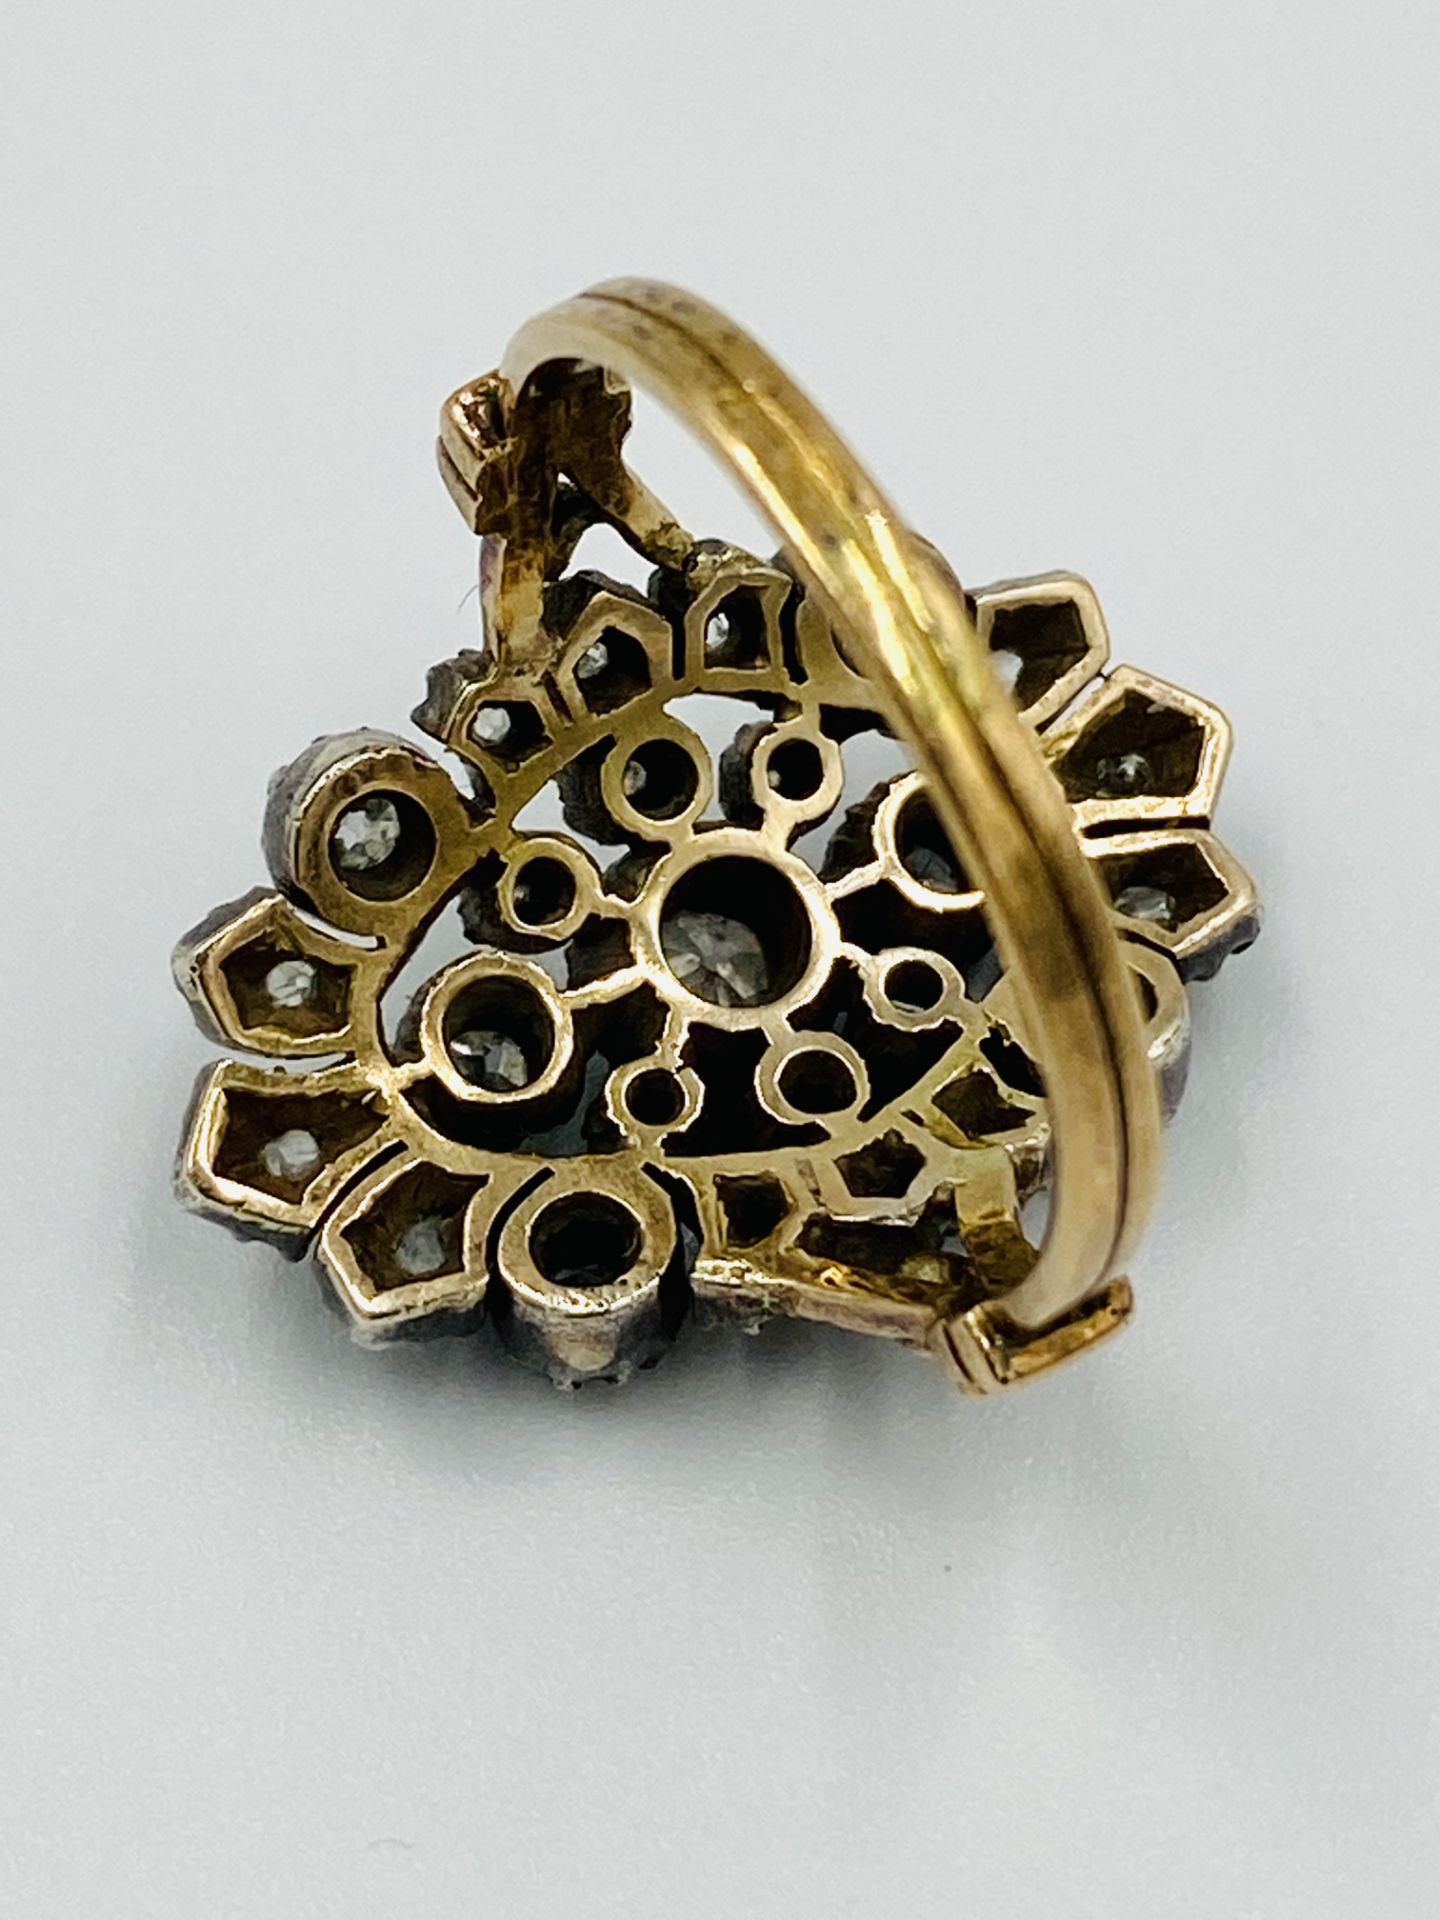 Antique gold and diamond ring - Image 4 of 5